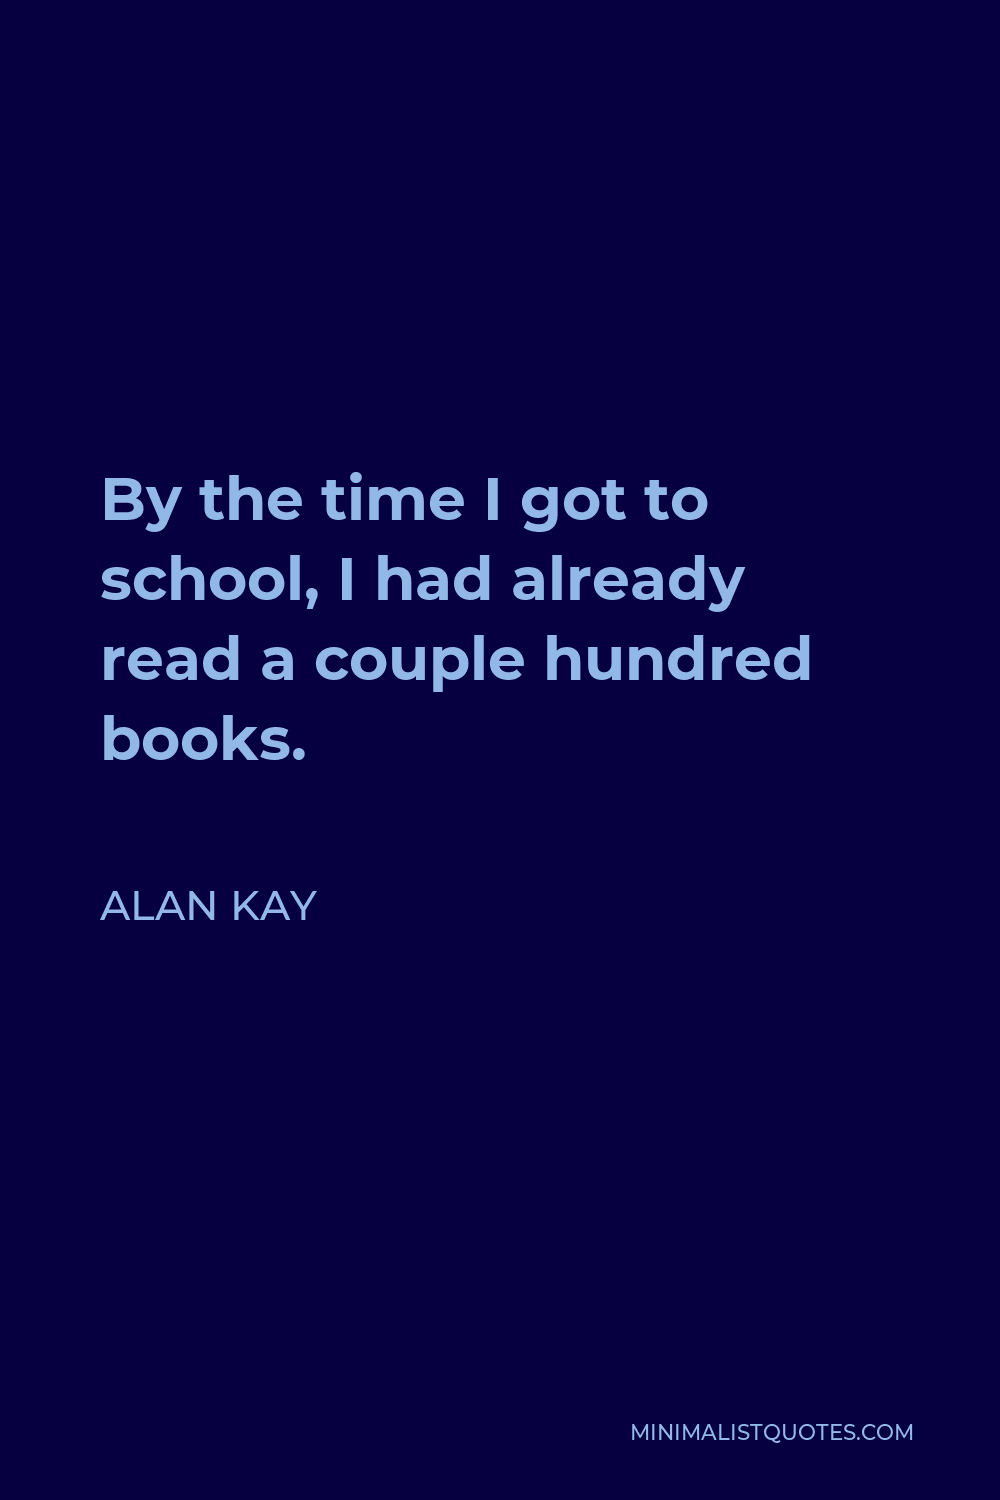 Alan Kay Quote - By the time I got to school, I had already read a couple hundred books.